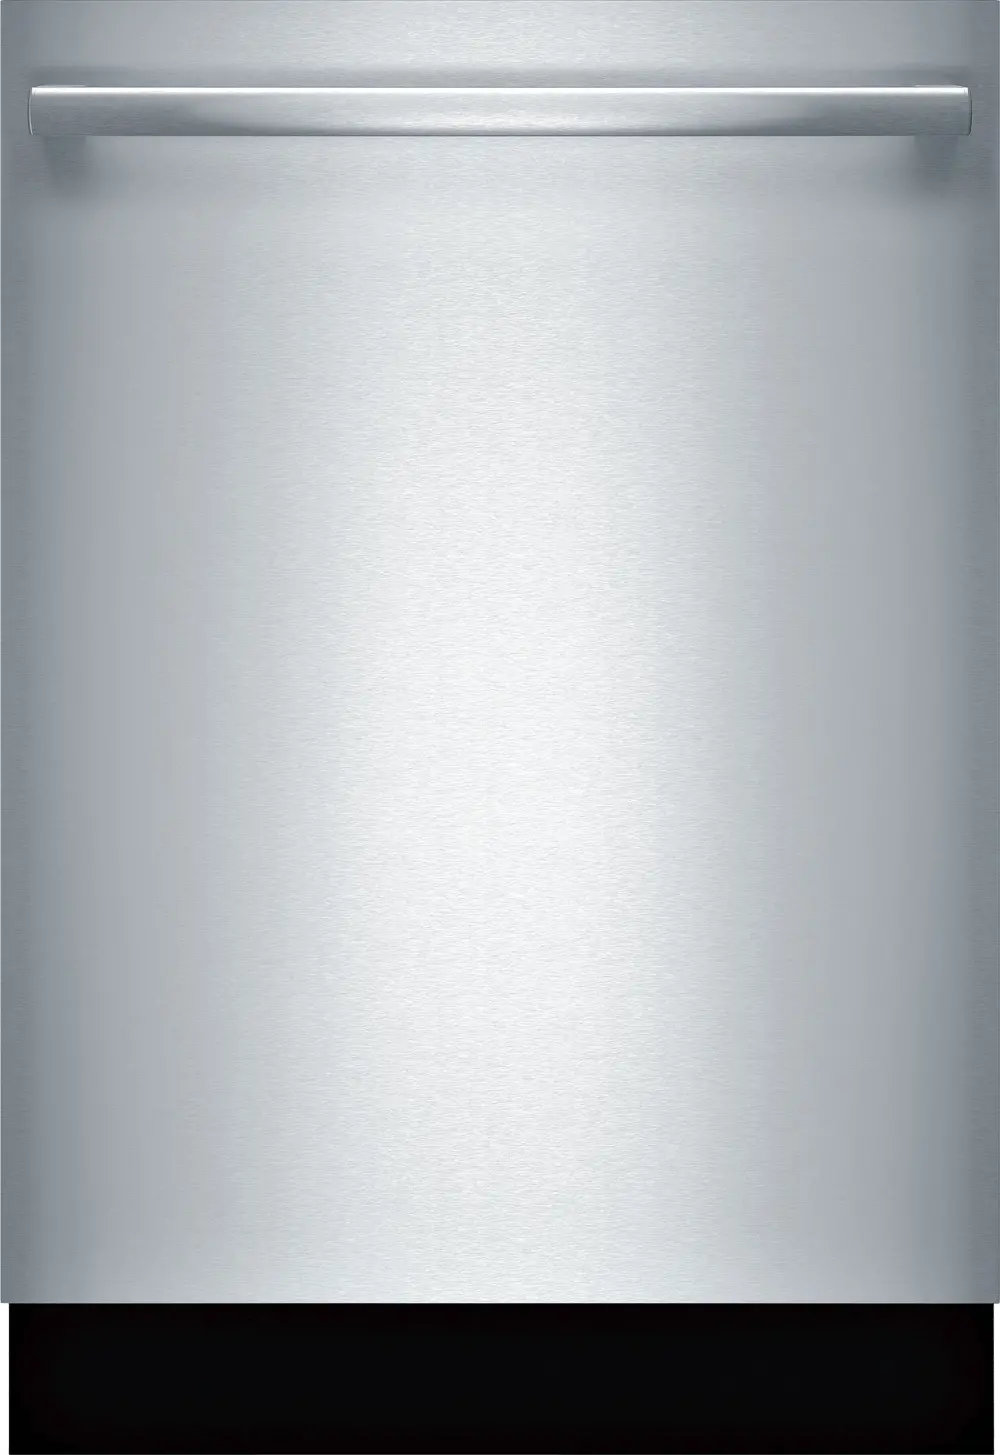 SHX87PZ55N Bosch Benchmark Dishwasher with CrystalDry - Stainless Steel-1